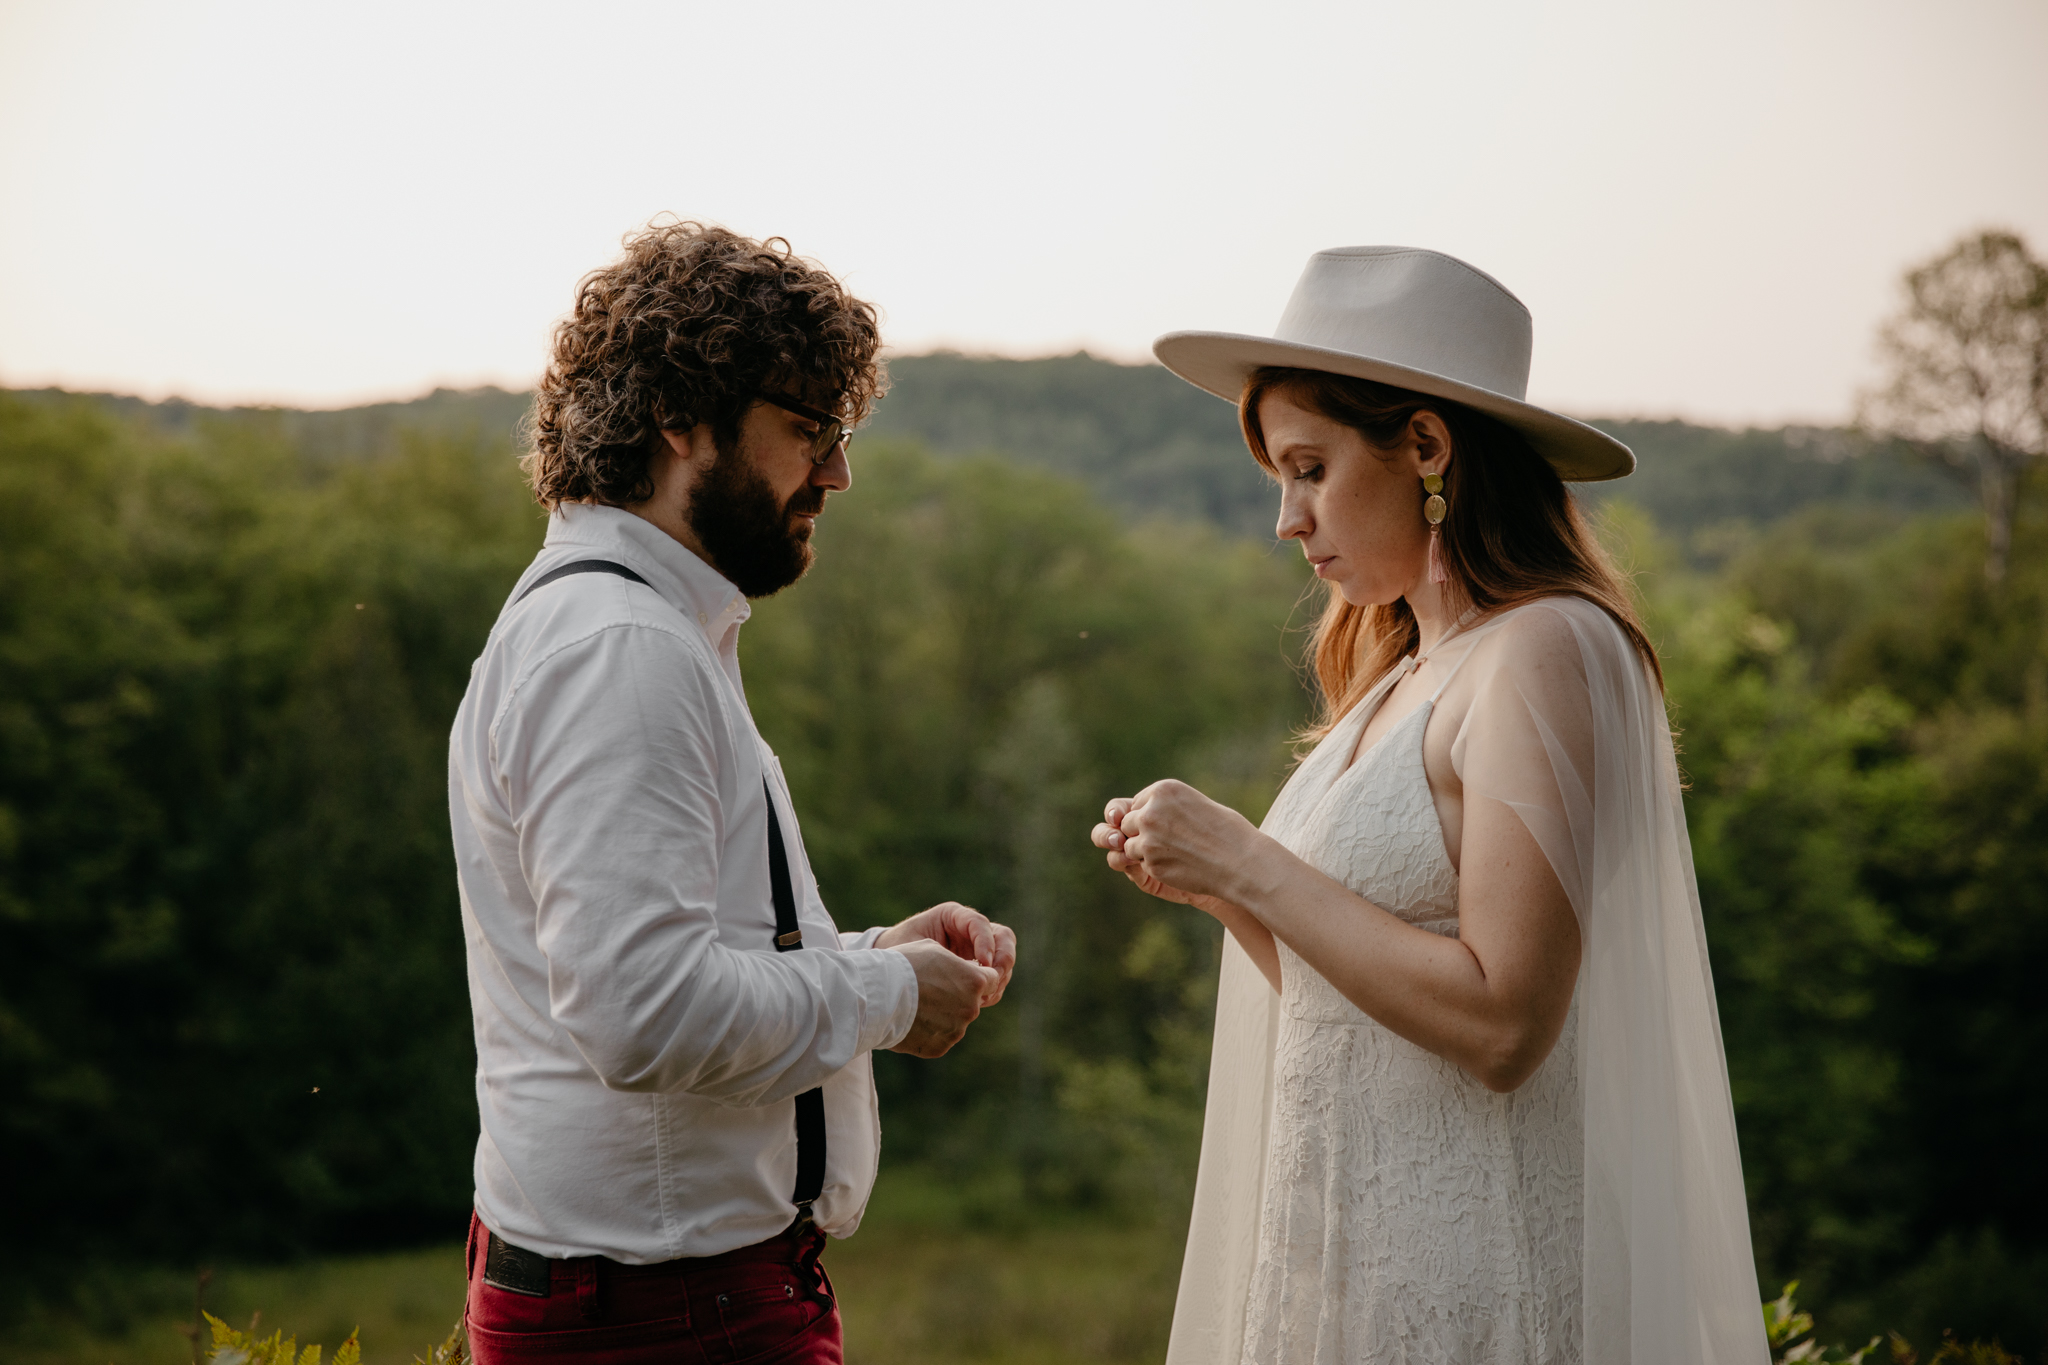 The sweetest ceremony on summer evening // Michigan Forest Elopement